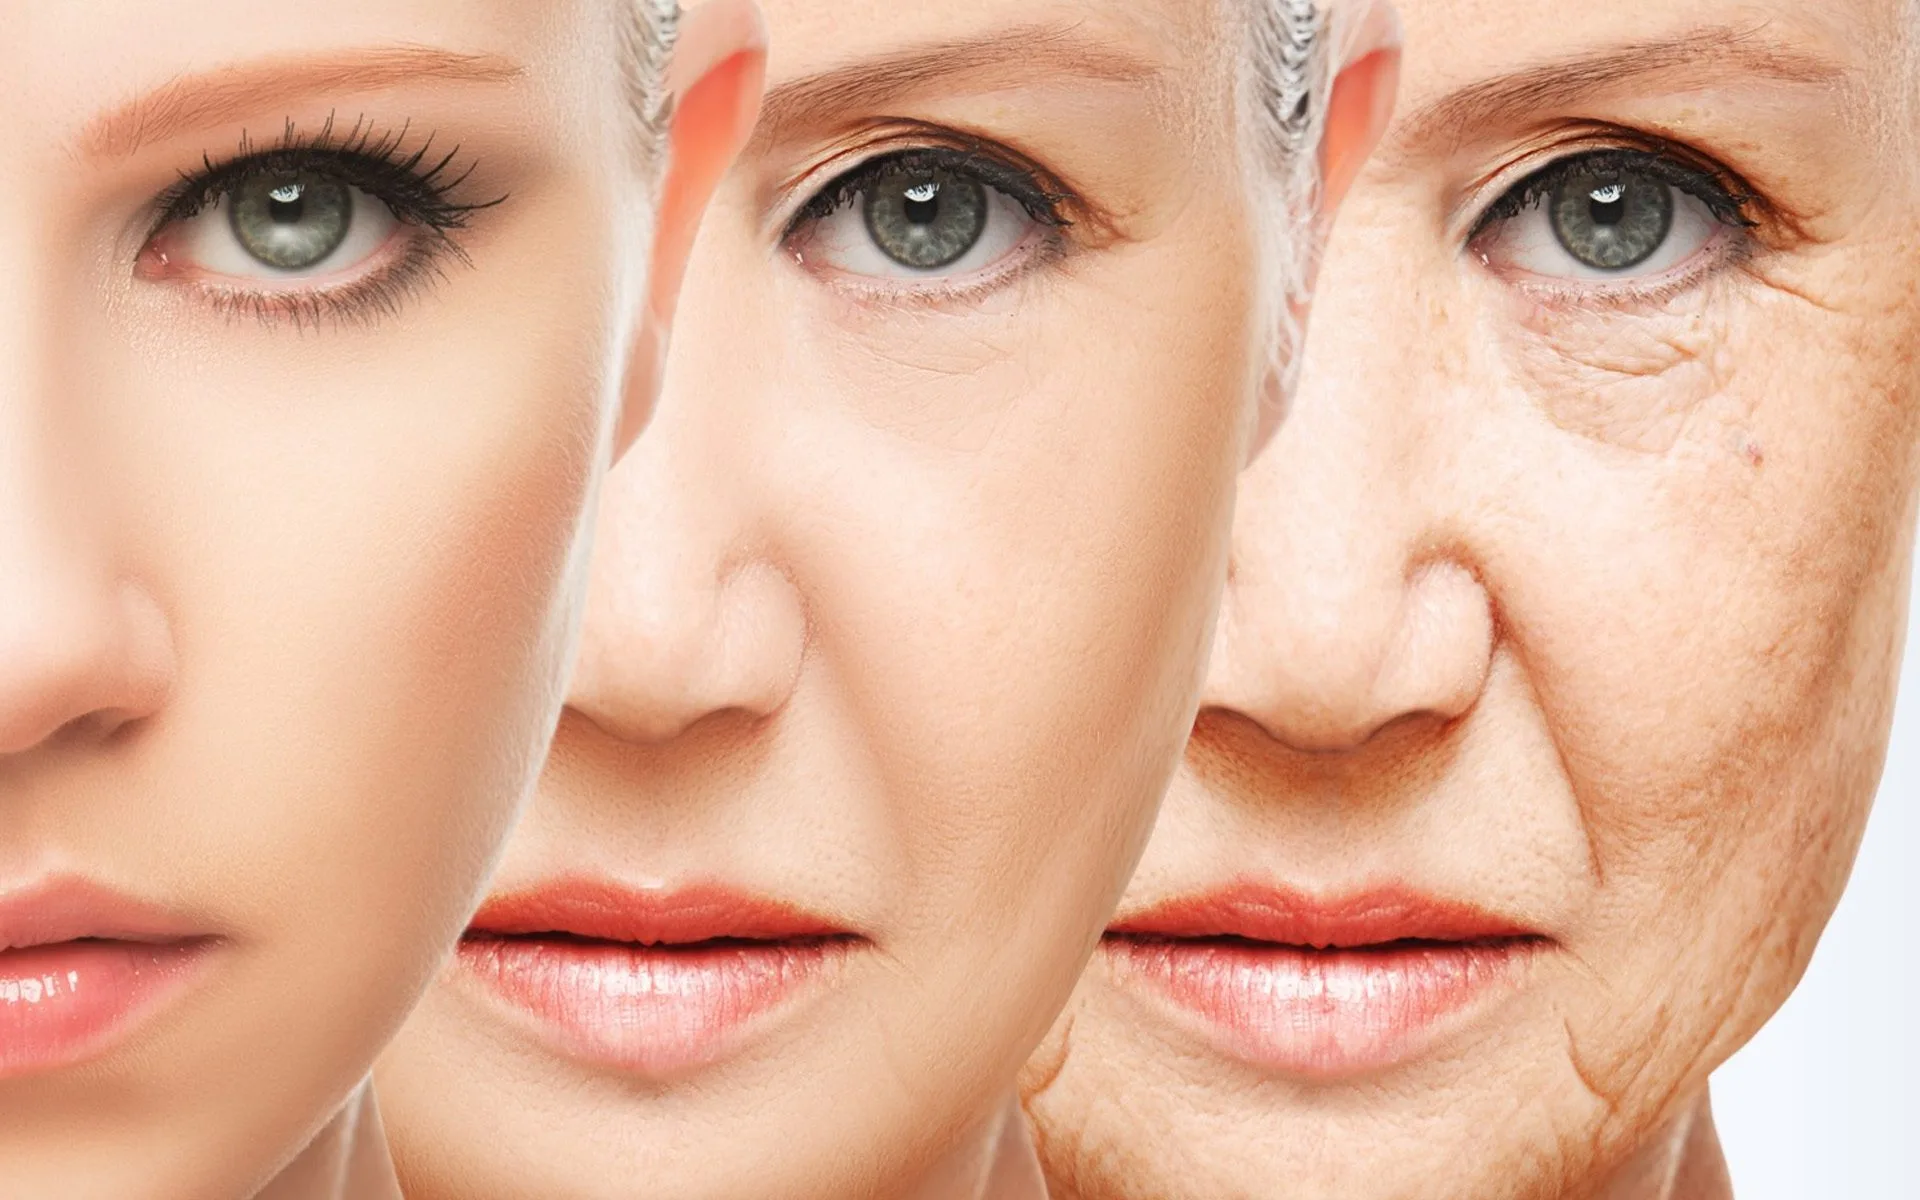 Top 7 Companies in the Anti-Aging Industry